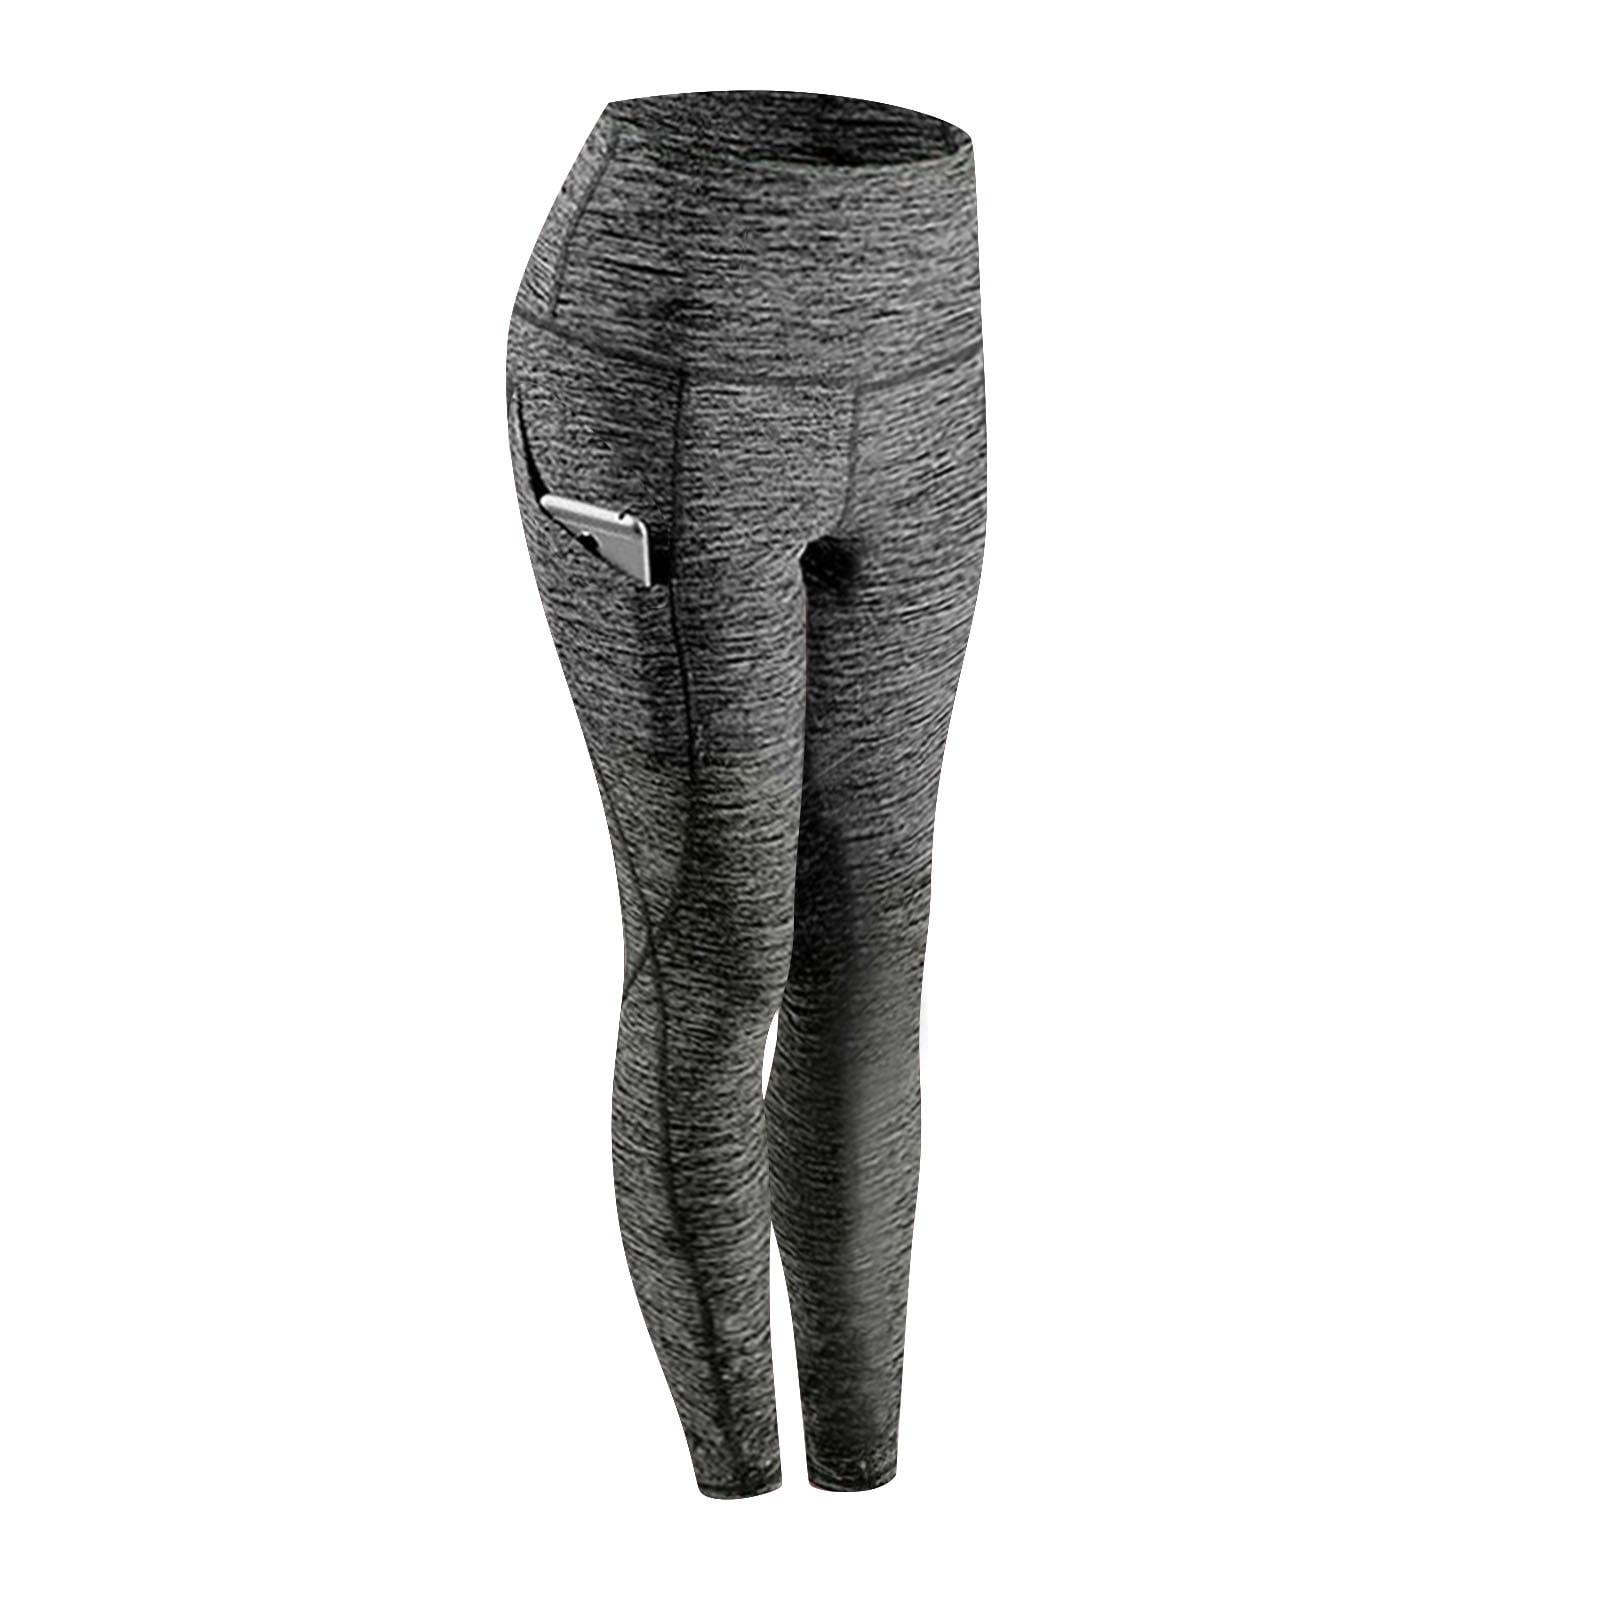 Womens Shaping Yoga Gym Leggings With Pockets With Air Pocket And Elastic  Fit For Work, Gym, Running, And Fitness Thread Work Clothes With Pockets  From Dhgatenicevip, $18.68